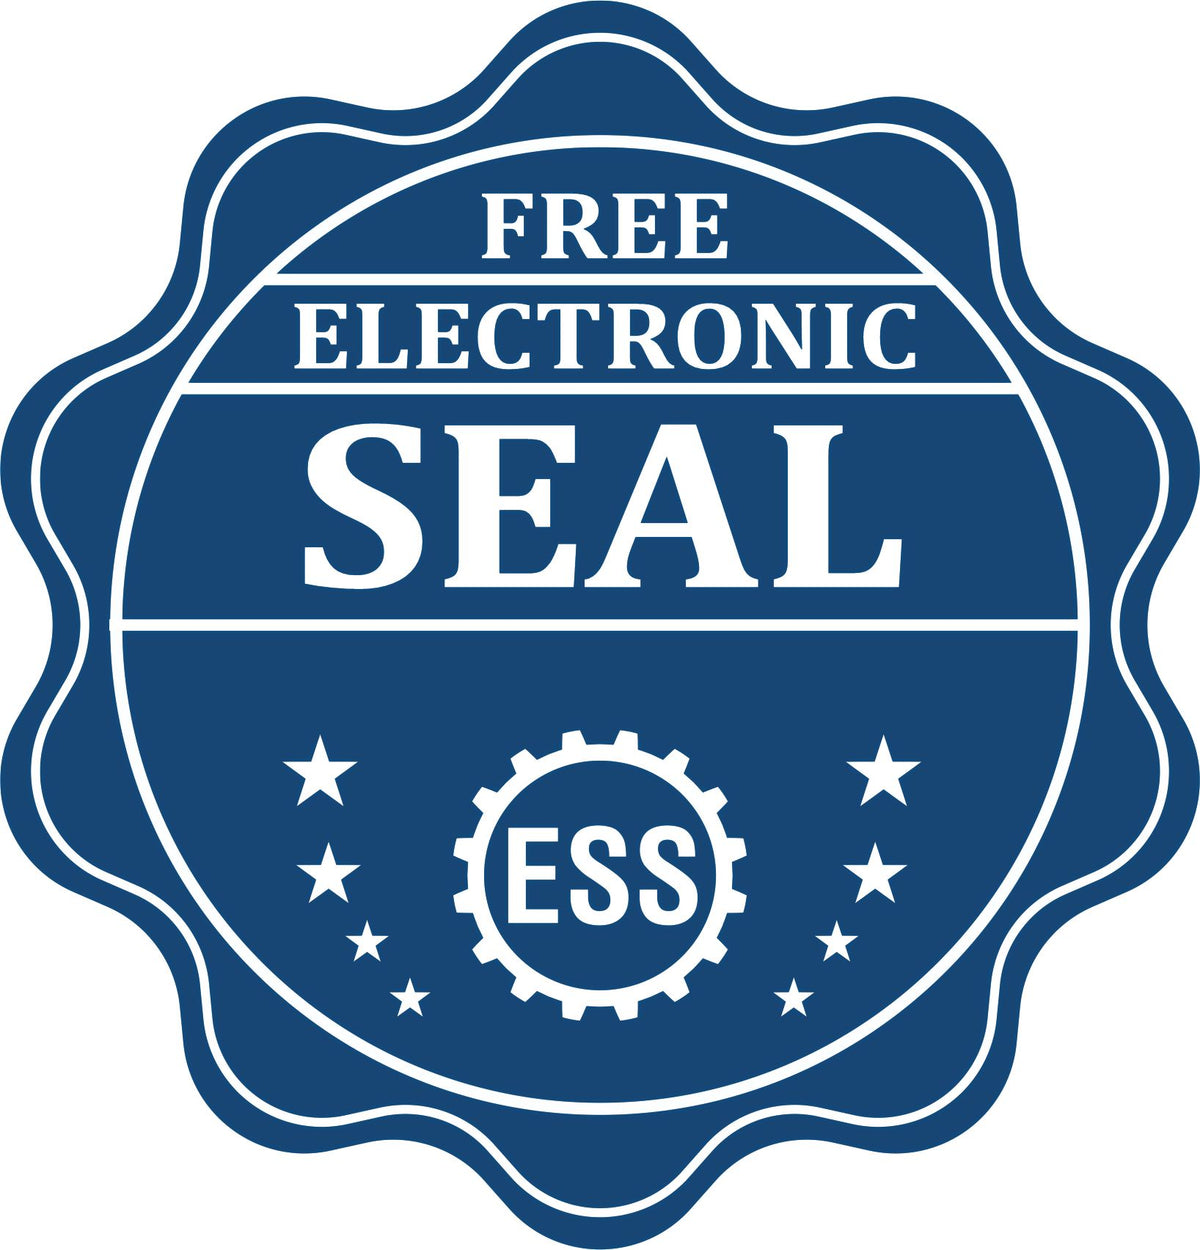 A badge showing a free electronic seal for the State of Idaho Soft Land Surveyor Embossing Seal with stars and the ESS gear on the emblem.